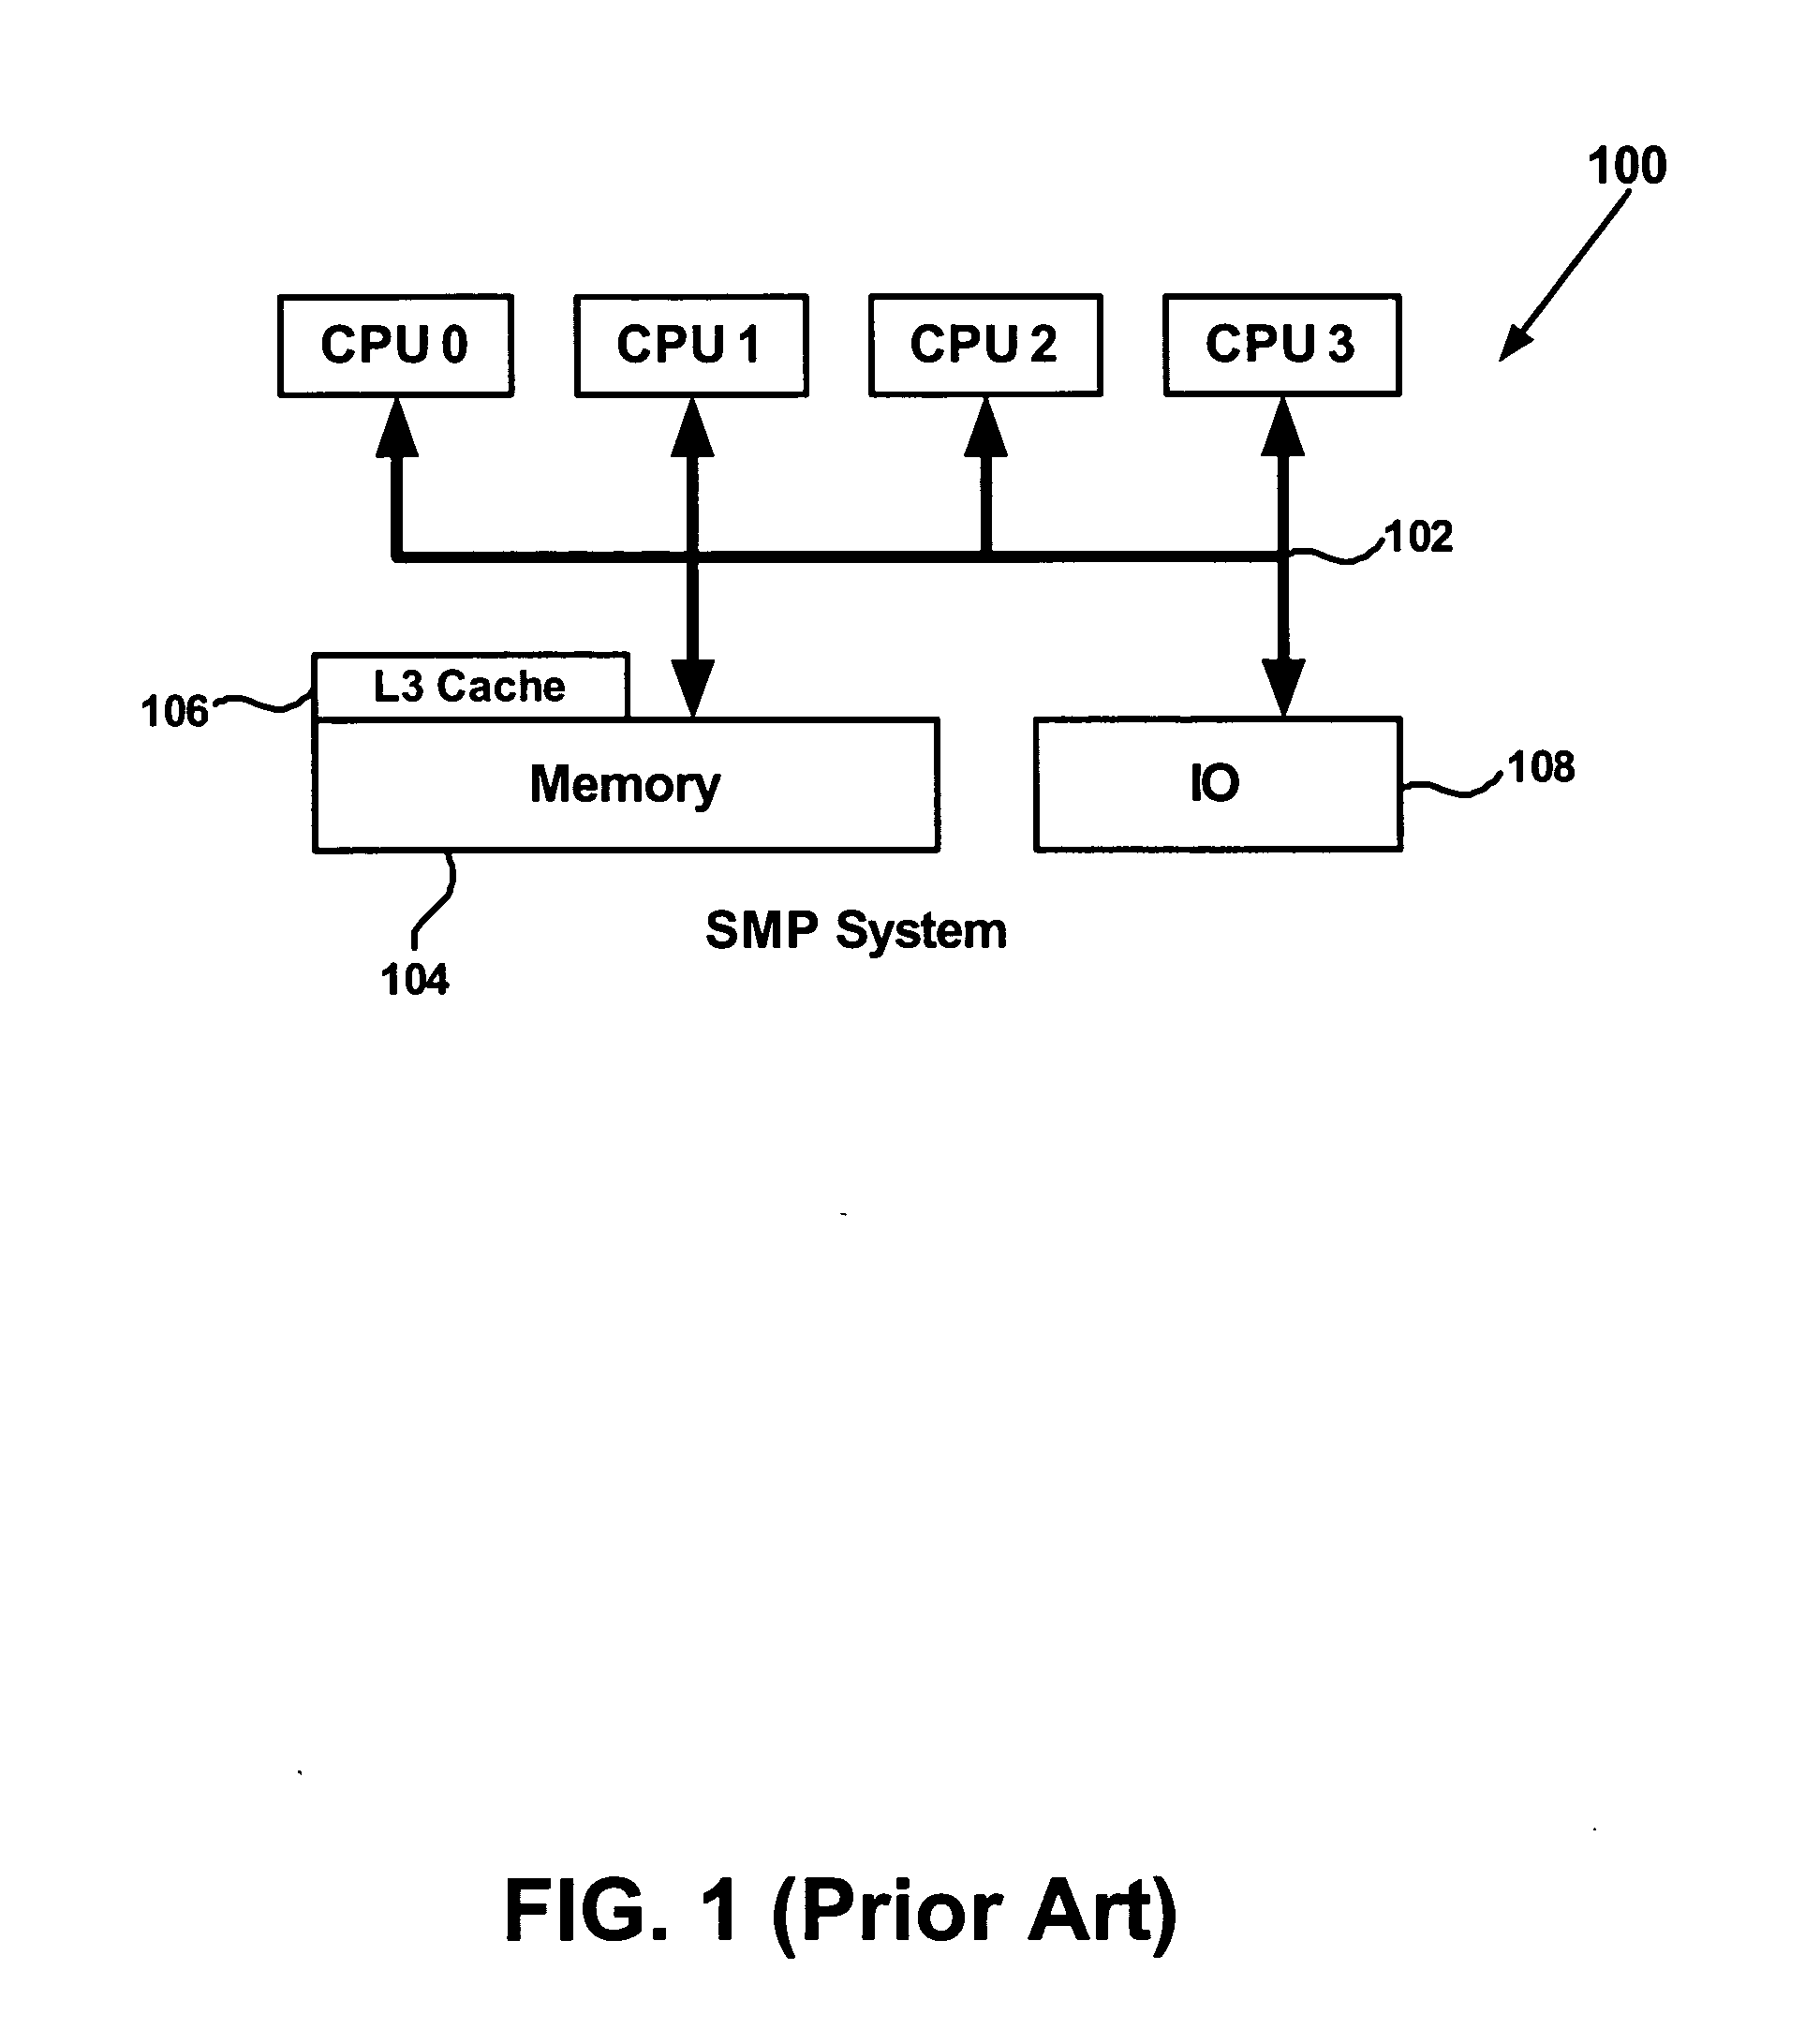 Method and apparatus for providing updated system locality information during runtime